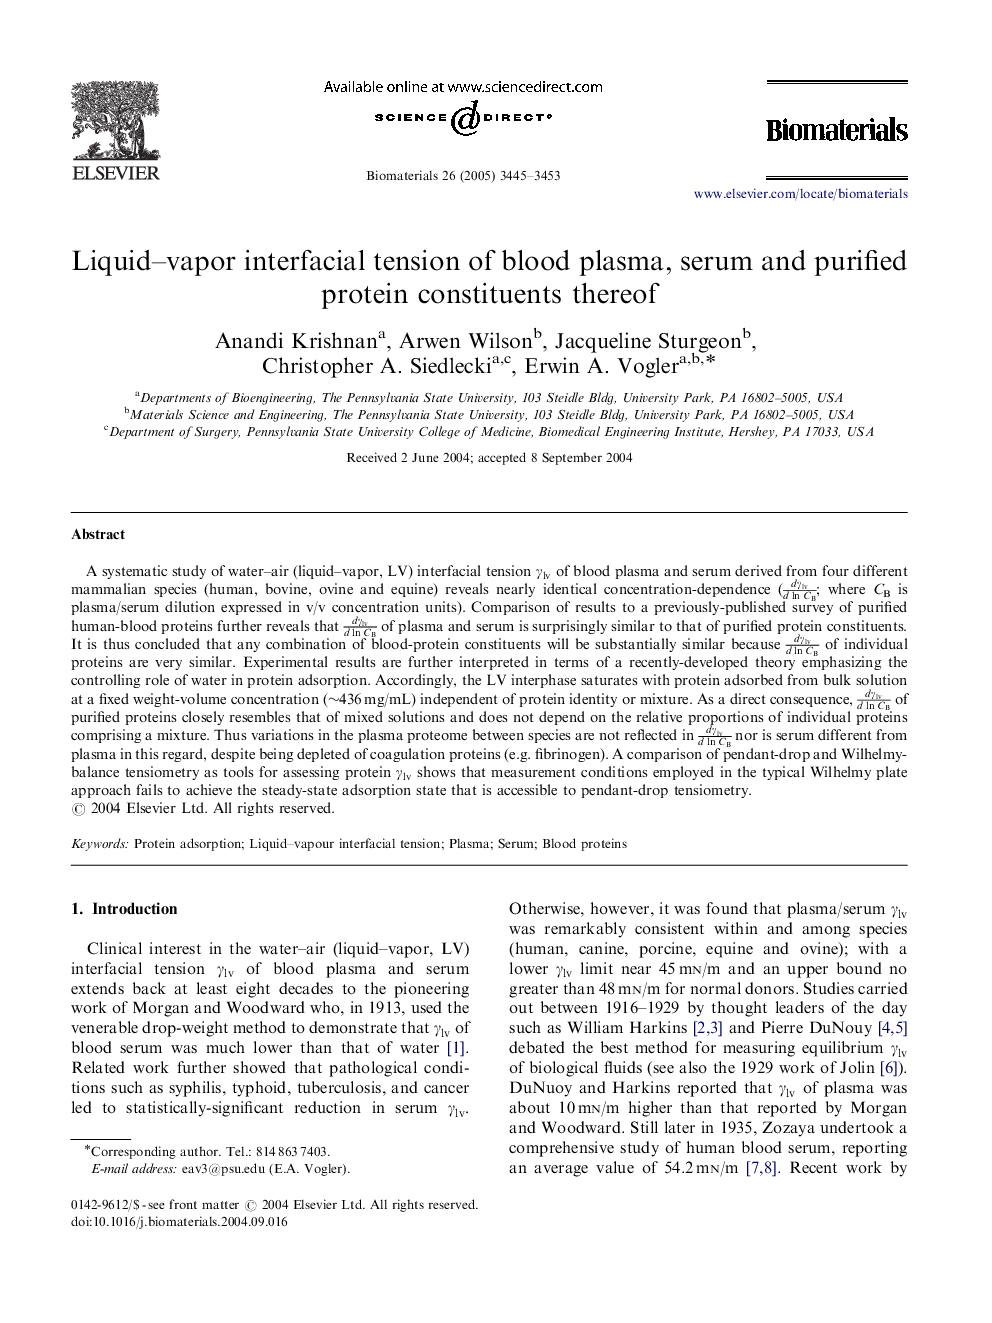 Liquid–vapor interfacial tension of blood plasma, serum and purified protein constituents thereof